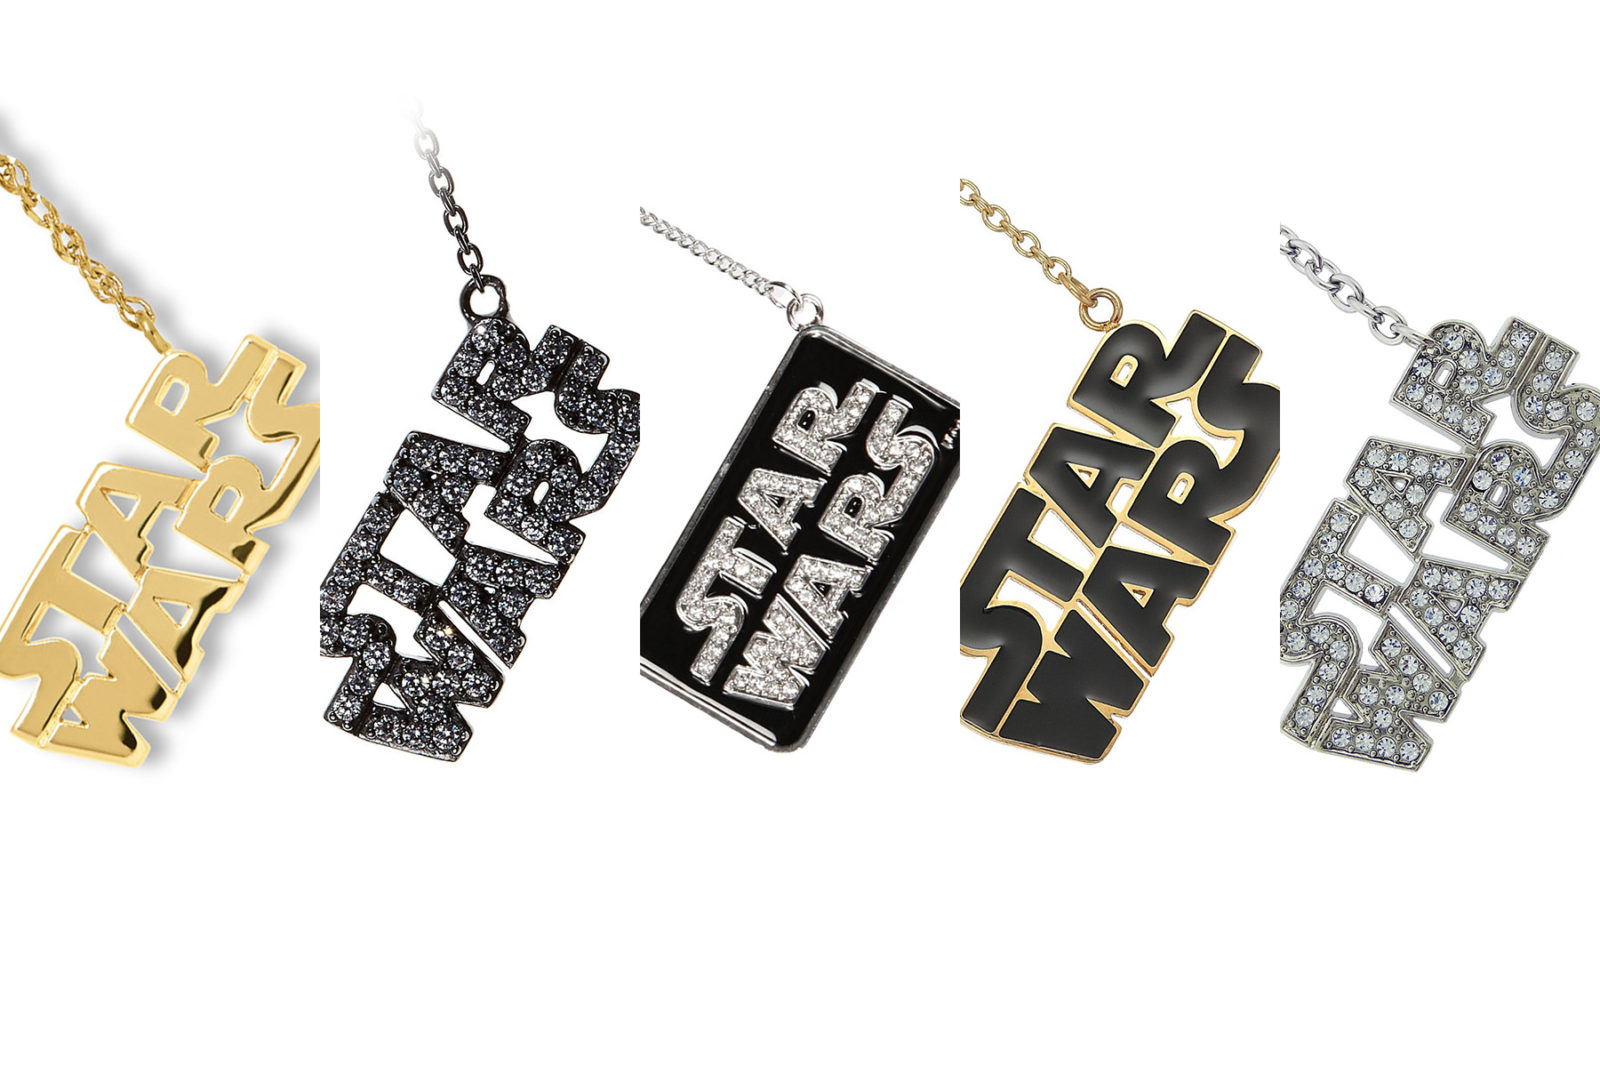 Leia's List - Star Wars logo necklaces currently available